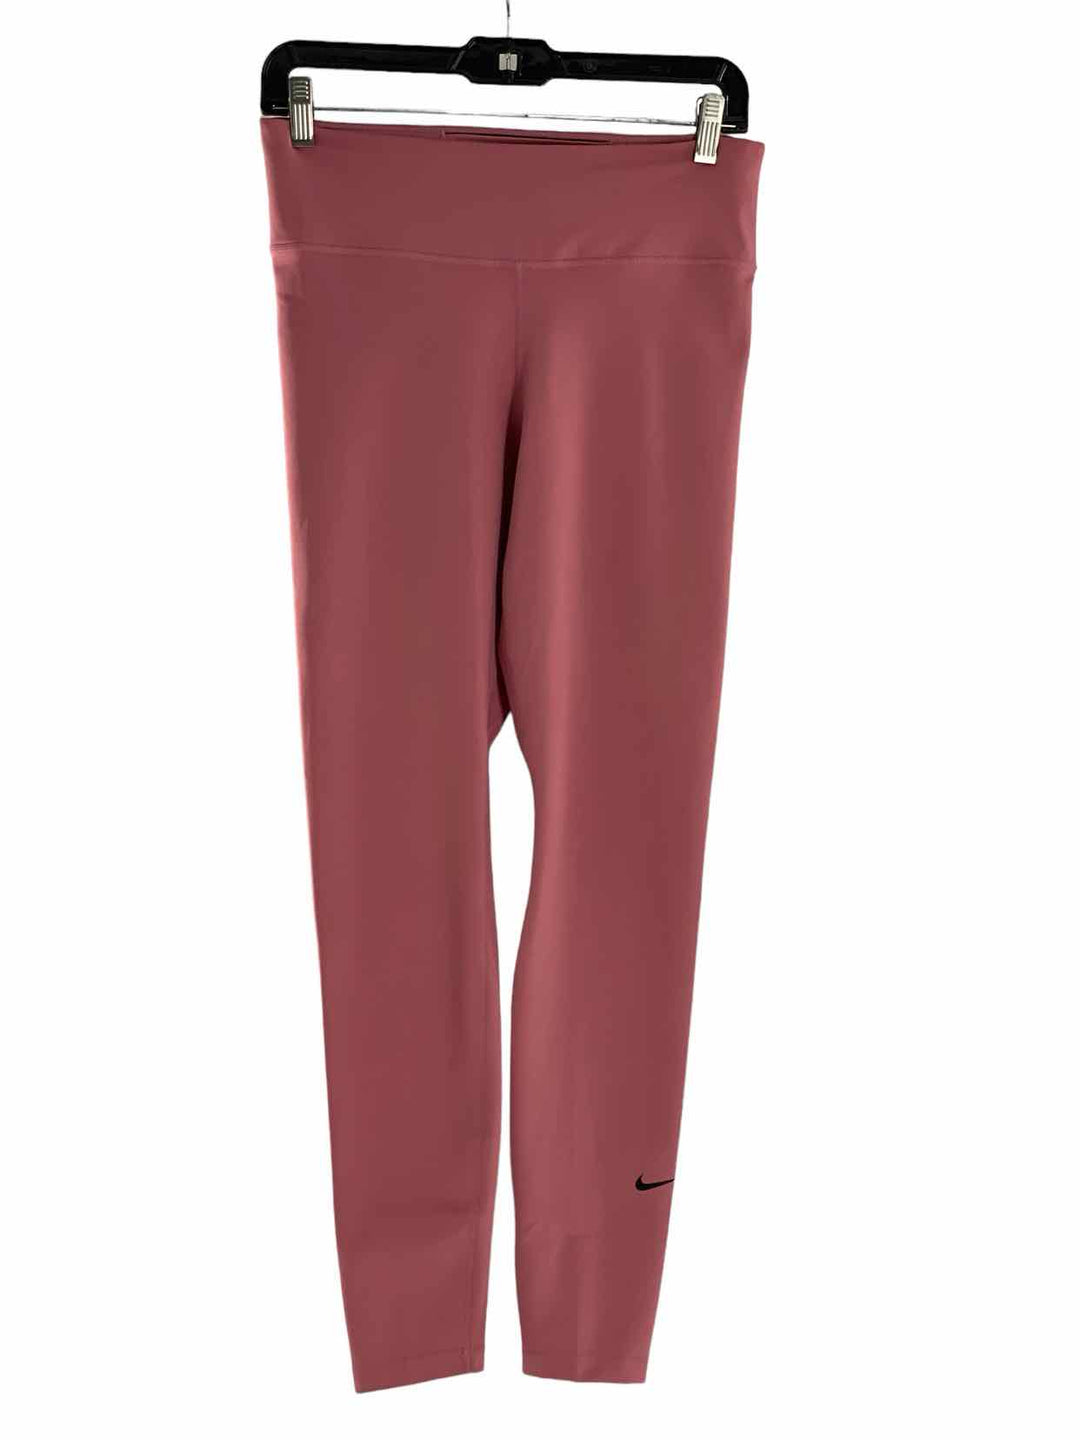 Nike Size M Pink Athletic Pants